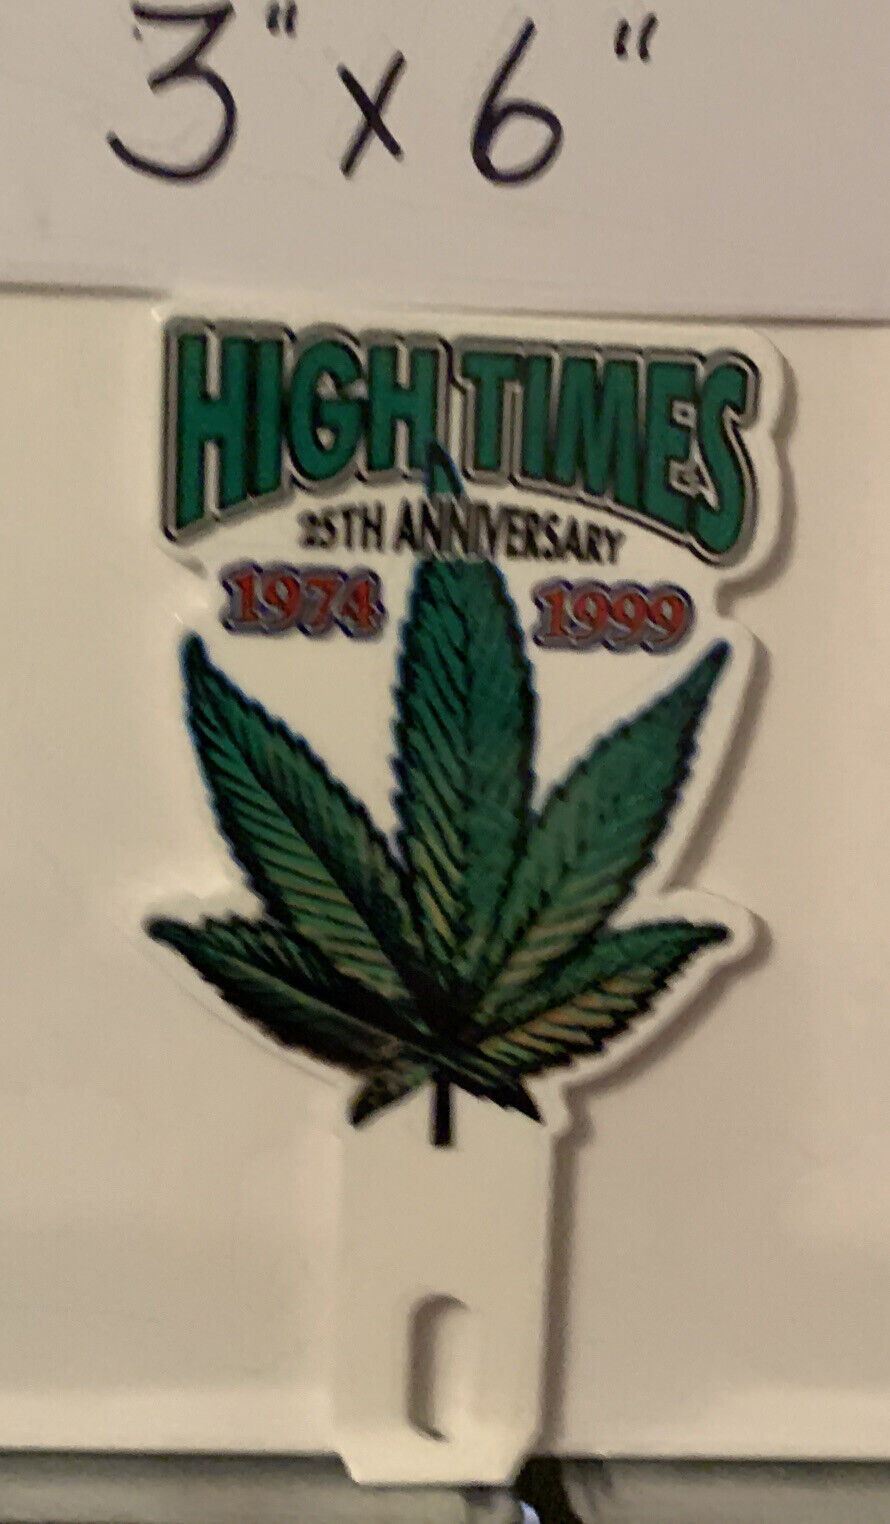 HIGH TIMES 25th Annv. Thick Metal Topper Sign Advertisement Smoking Sale GasOil